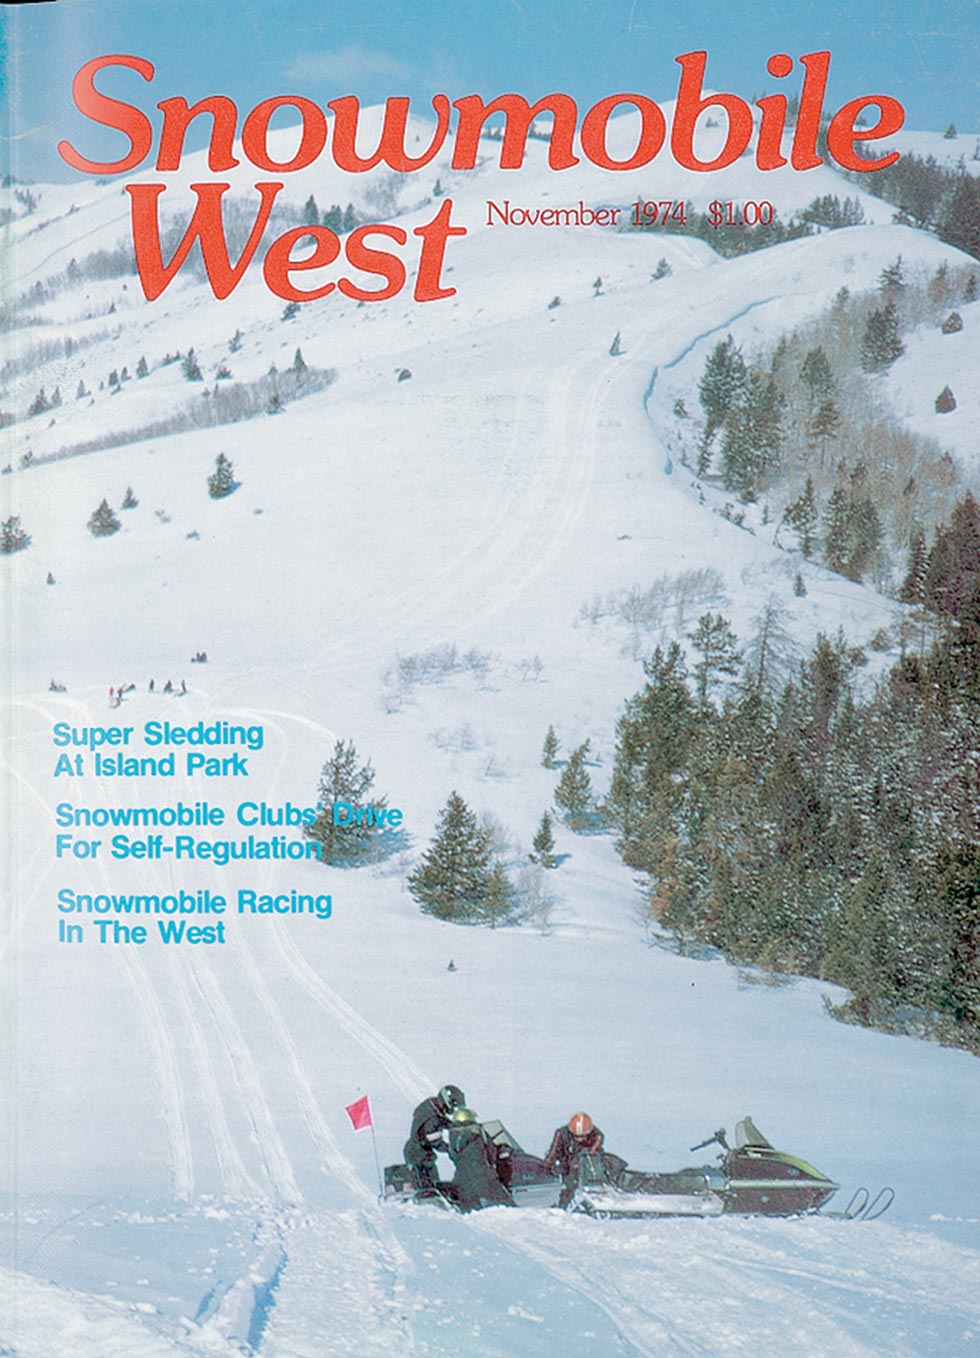 Snowmobile West November 1974 issue cover